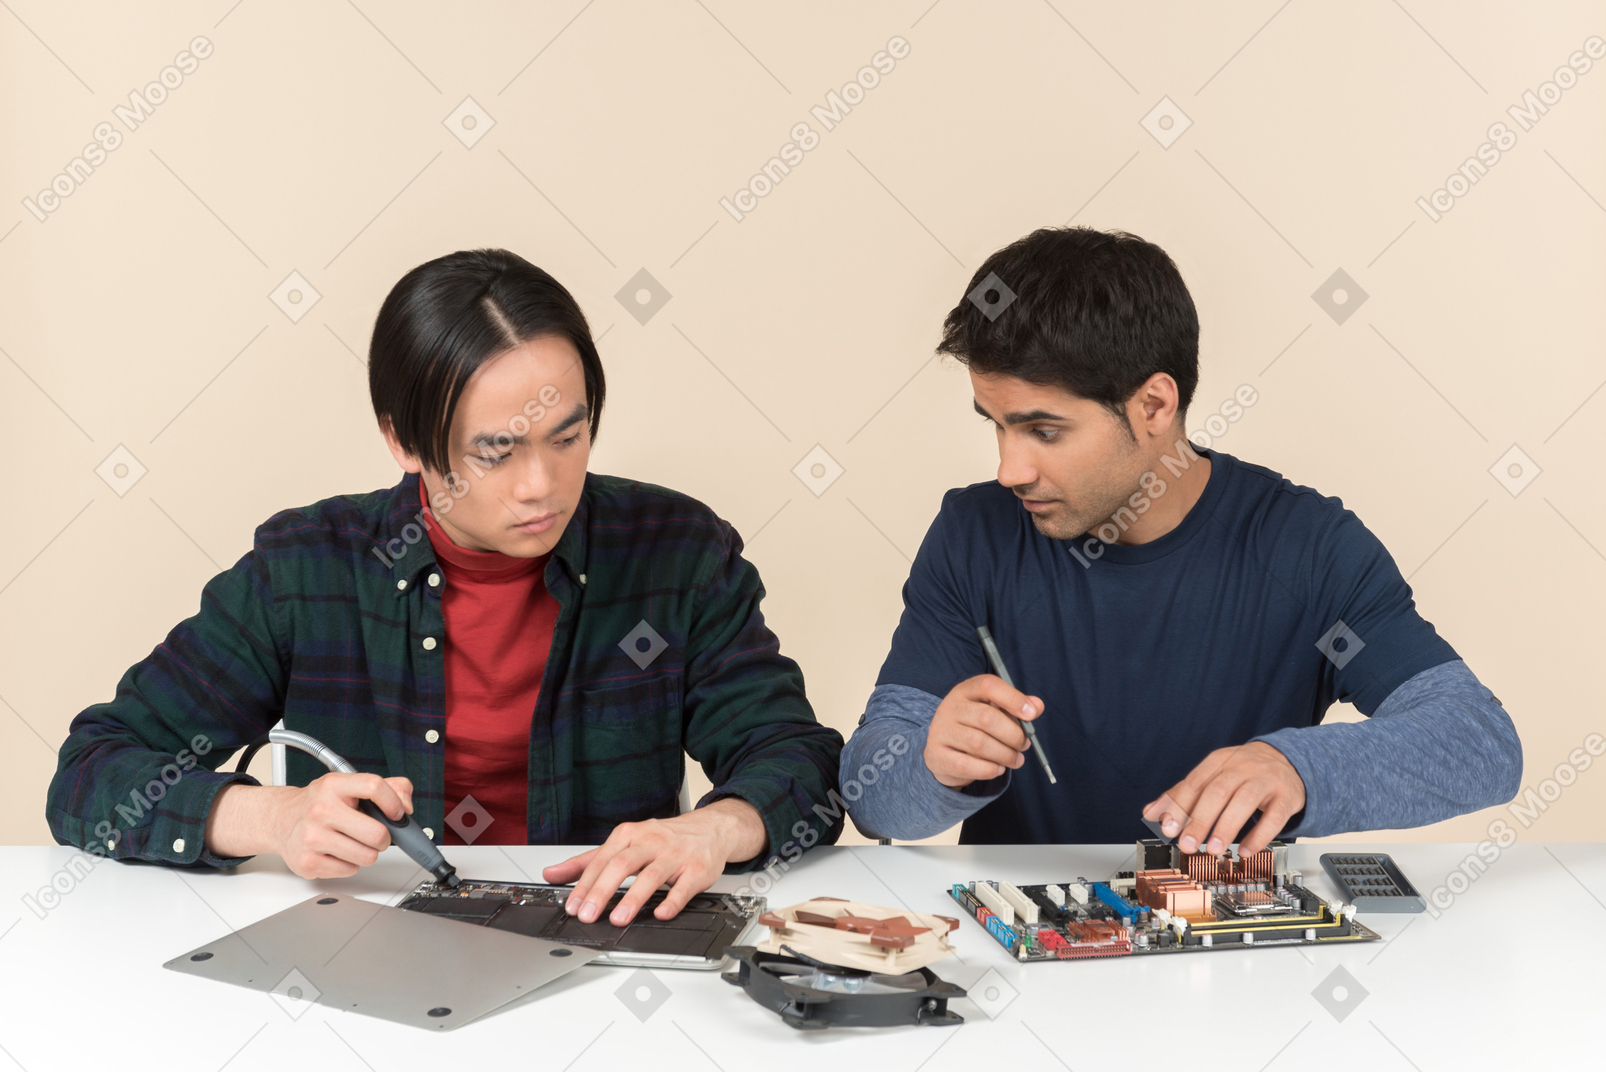 Two geeks sitting at the table and fixing some details